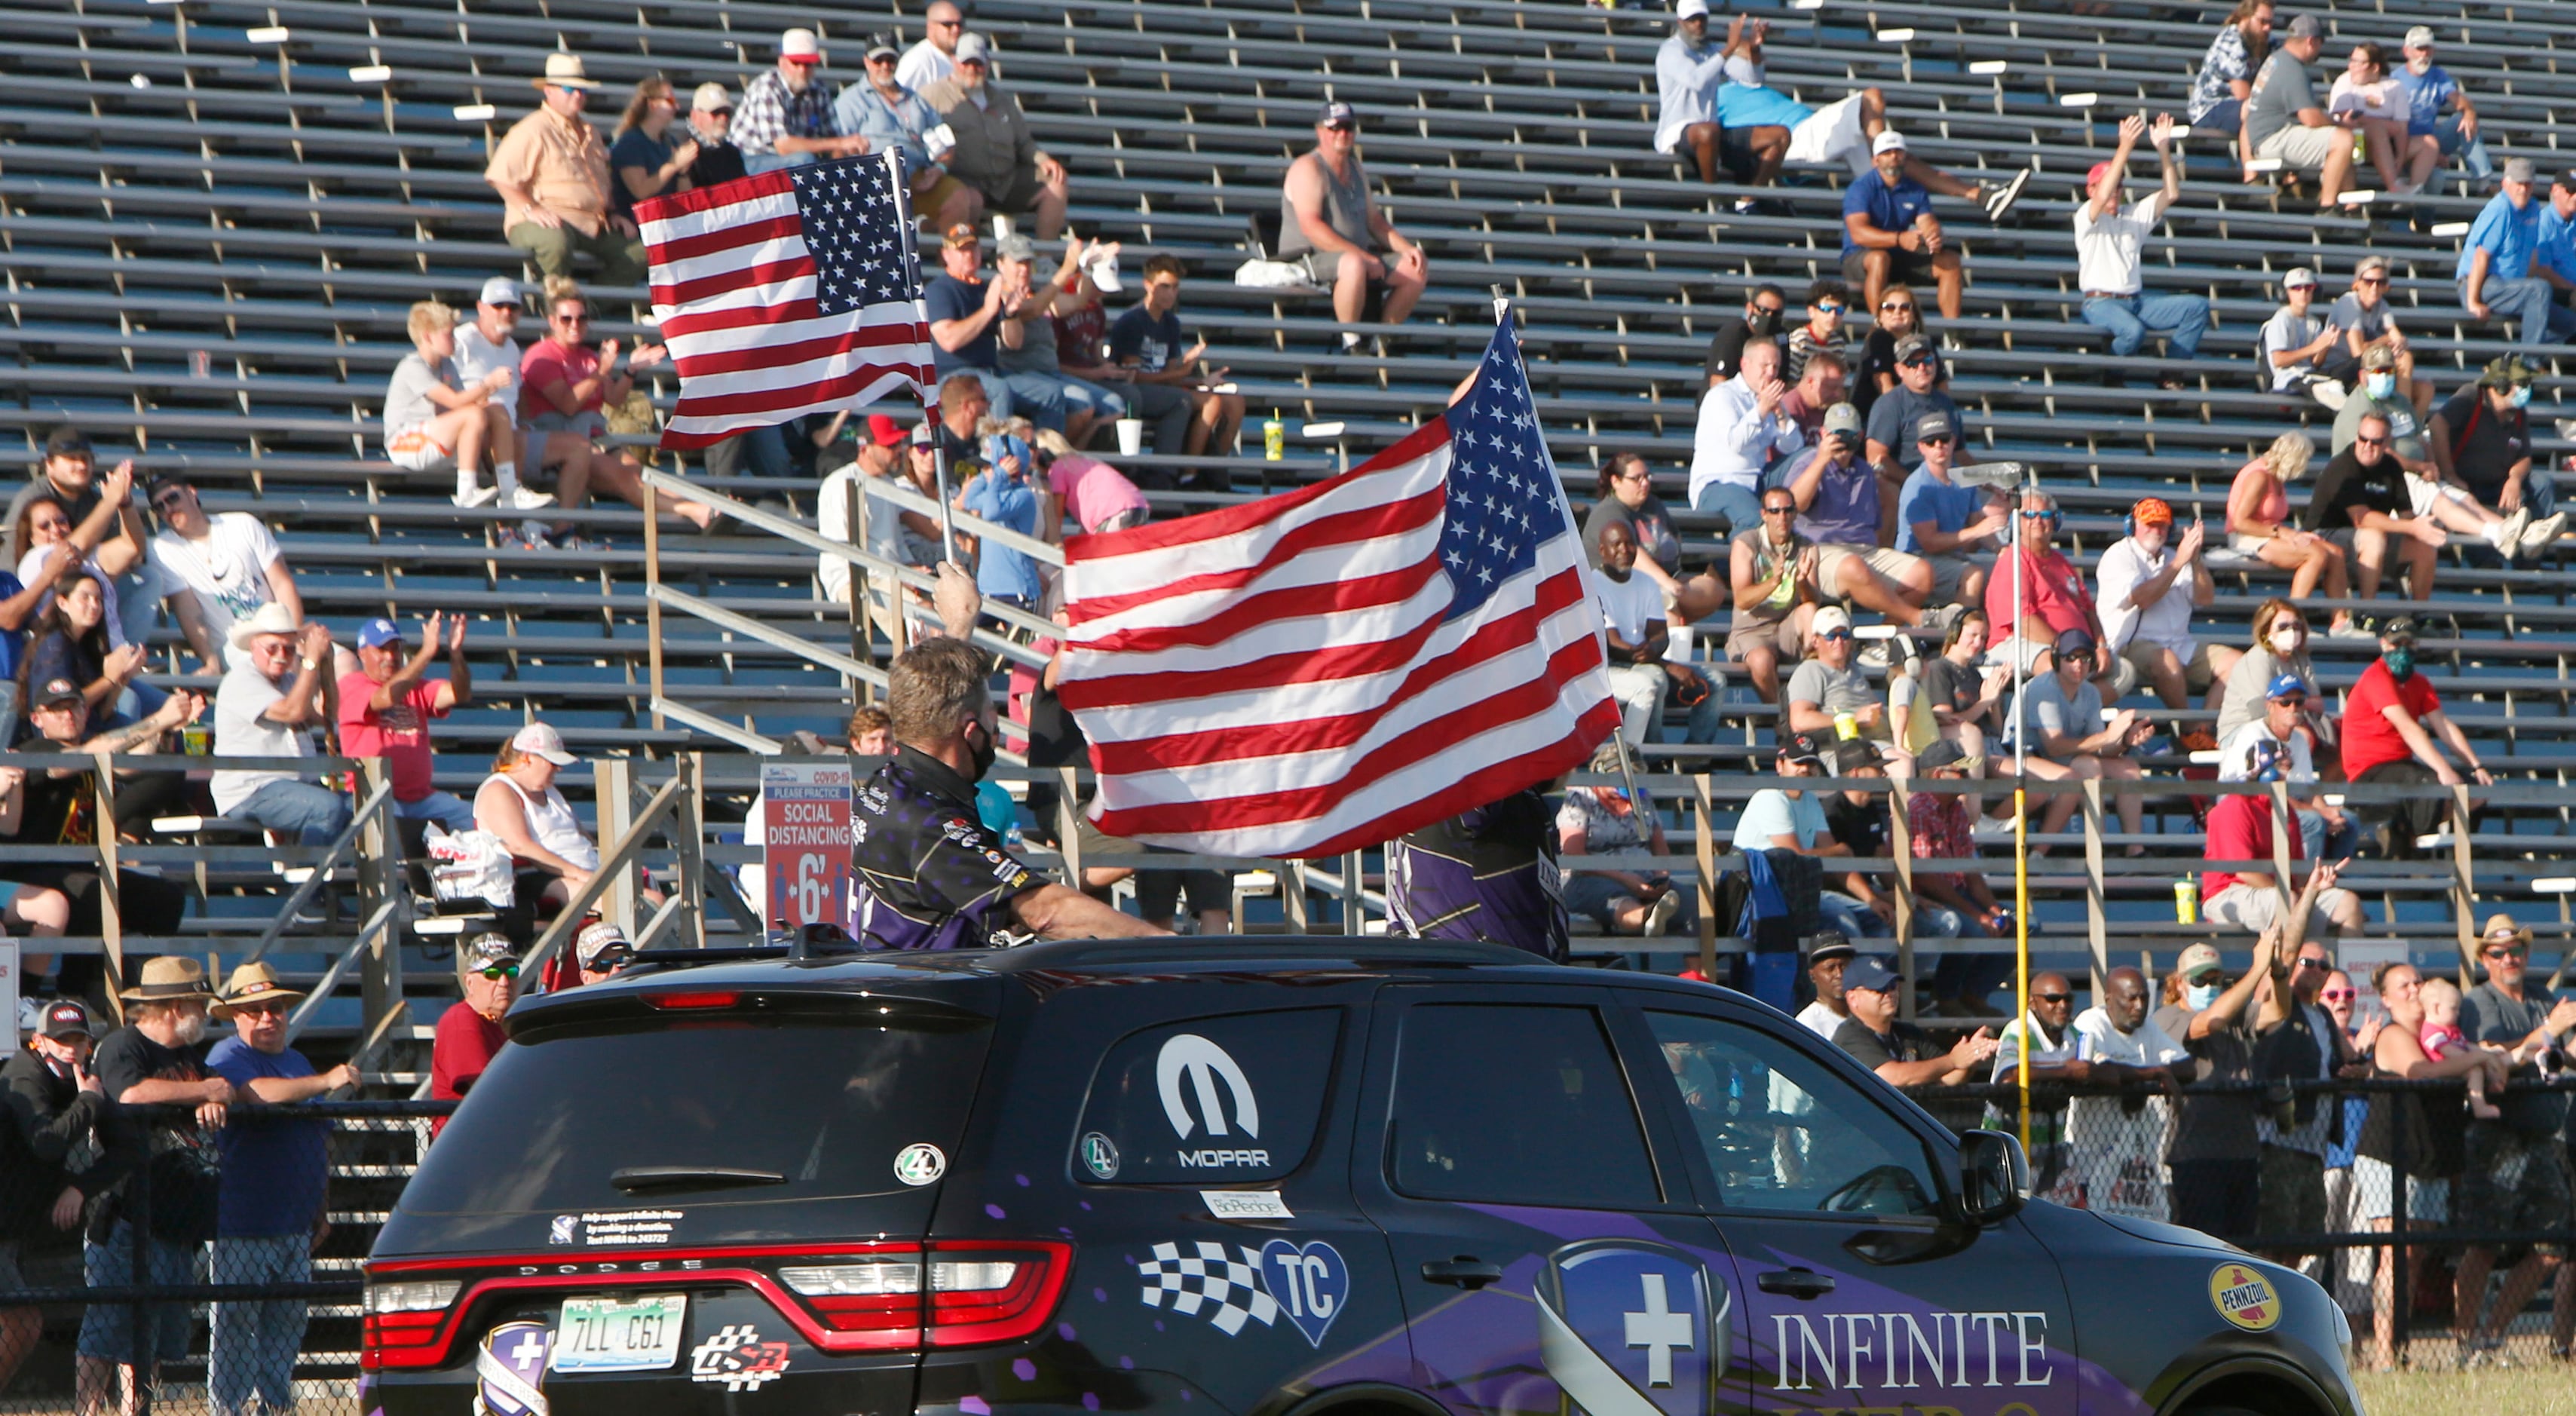 Racing fans cheer as a racing team sponsor drives around the track waving american flags....